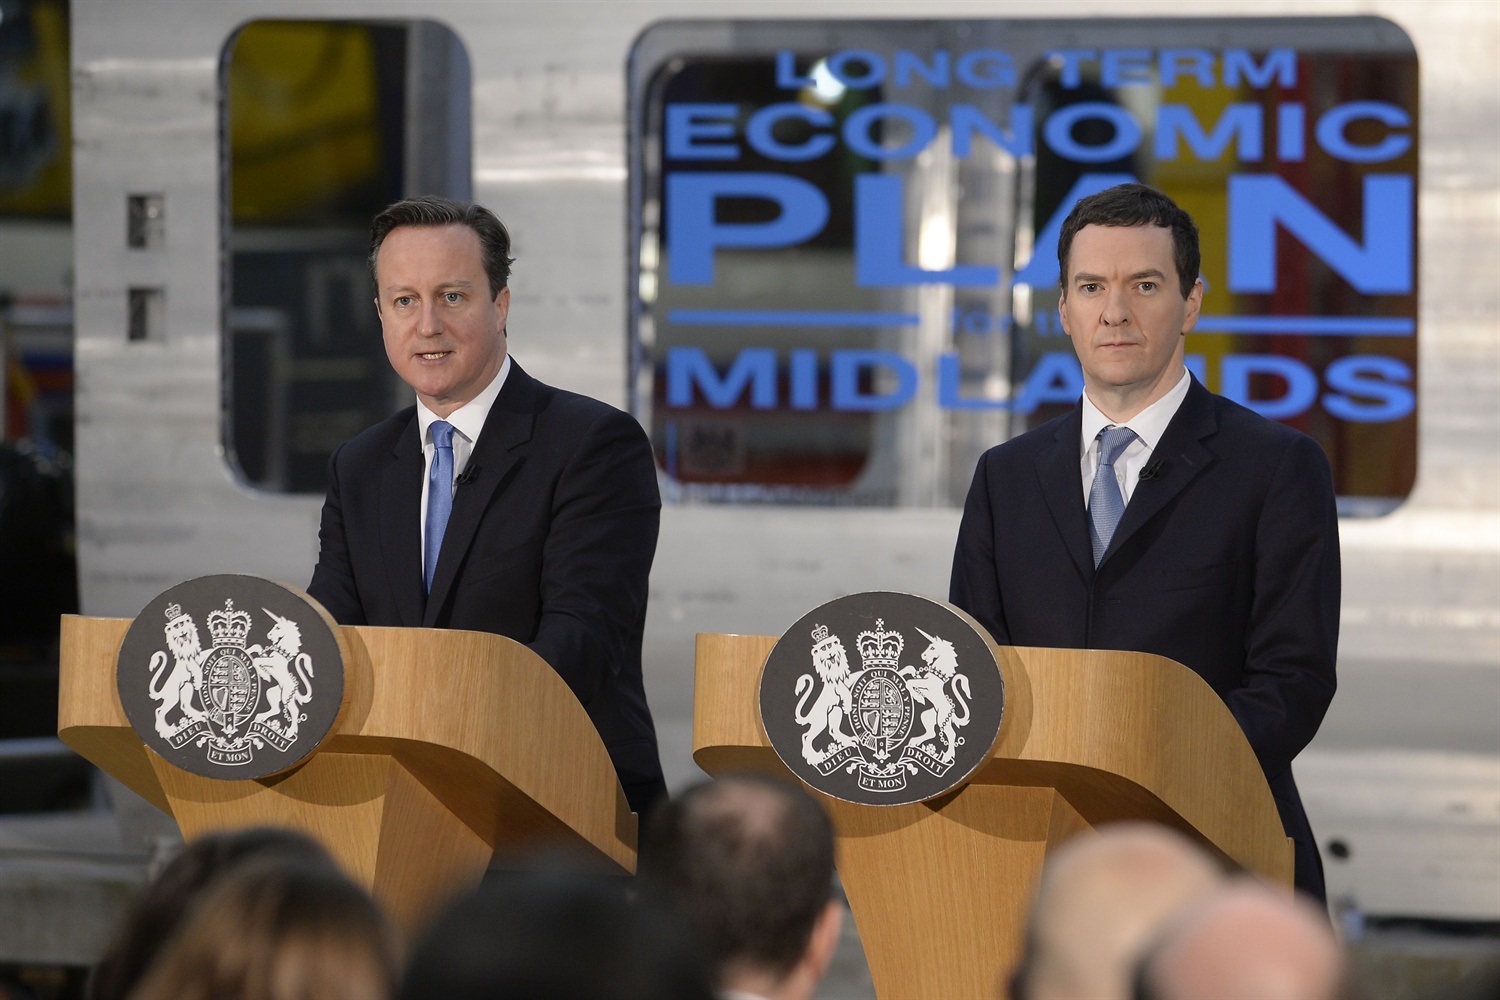 NR to look ‘seriously’ at extending electrification in the Midlands – Osborne 